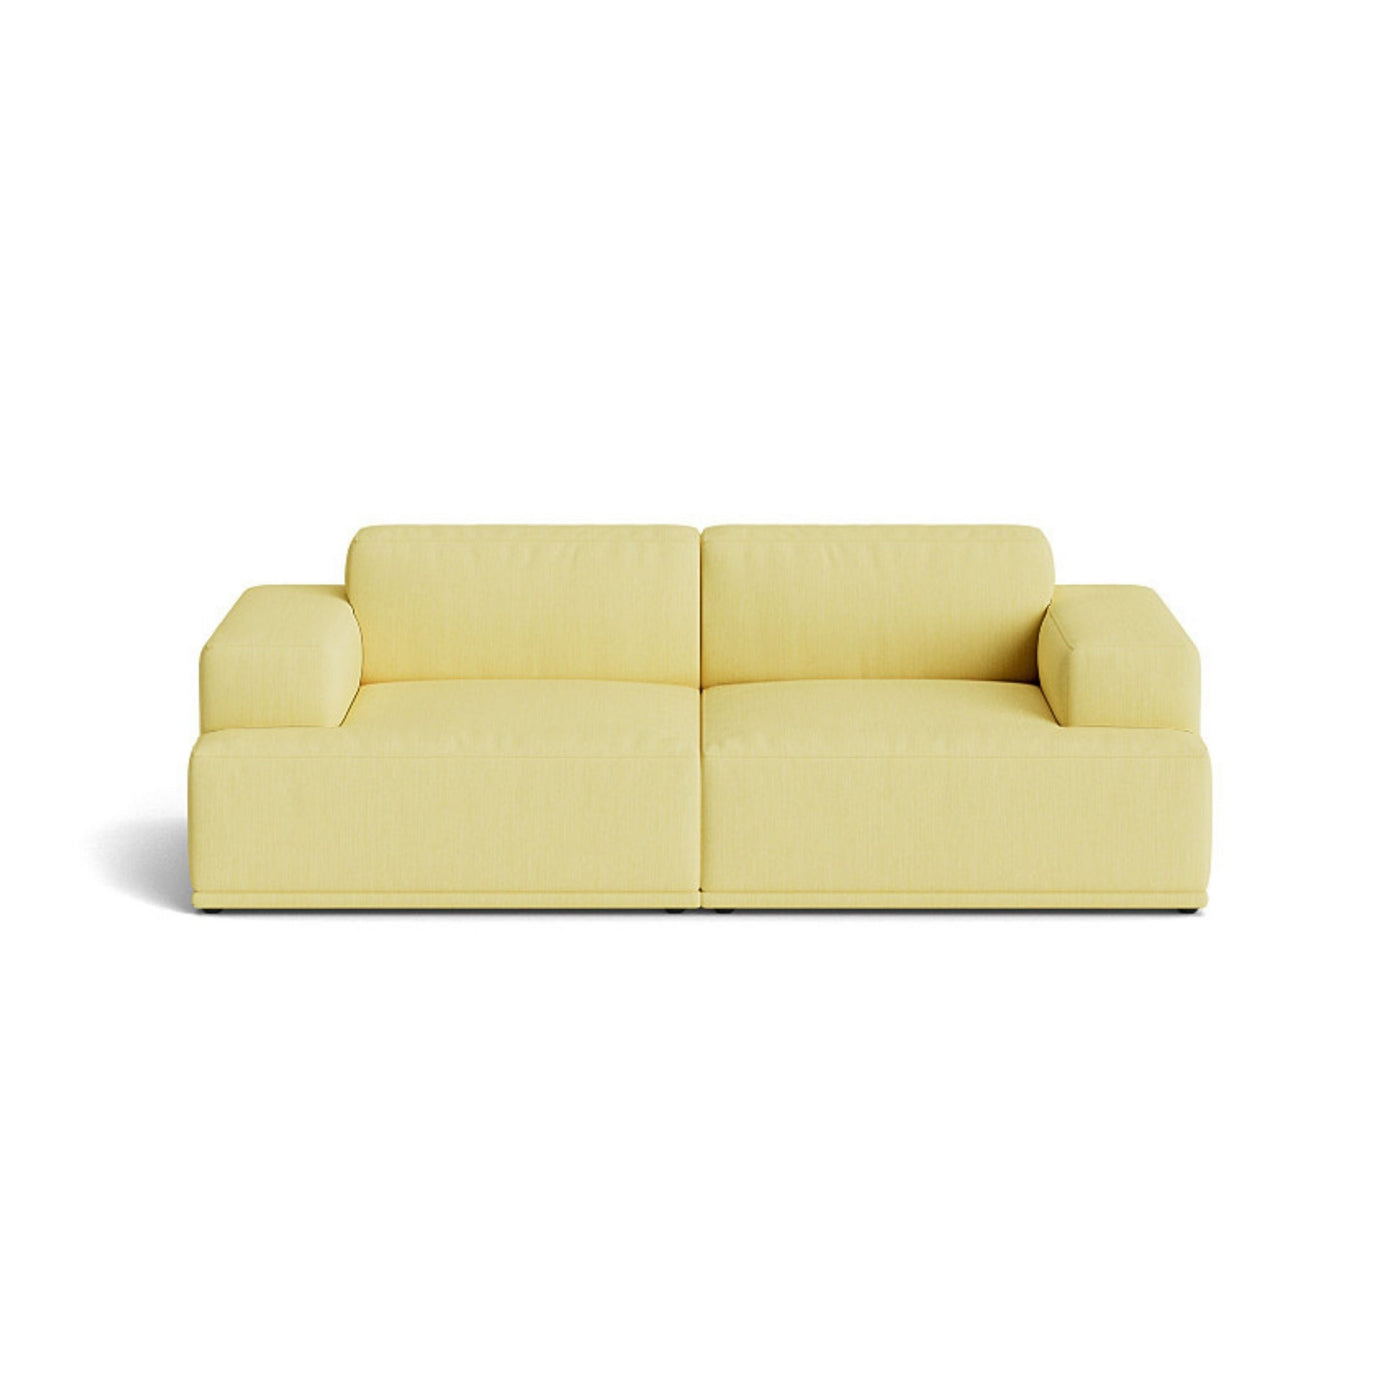 Muuto Connect Soft Modular 2 Seater Sofa, configuration 1. made-to-order from someday designs. #colour_balder-432